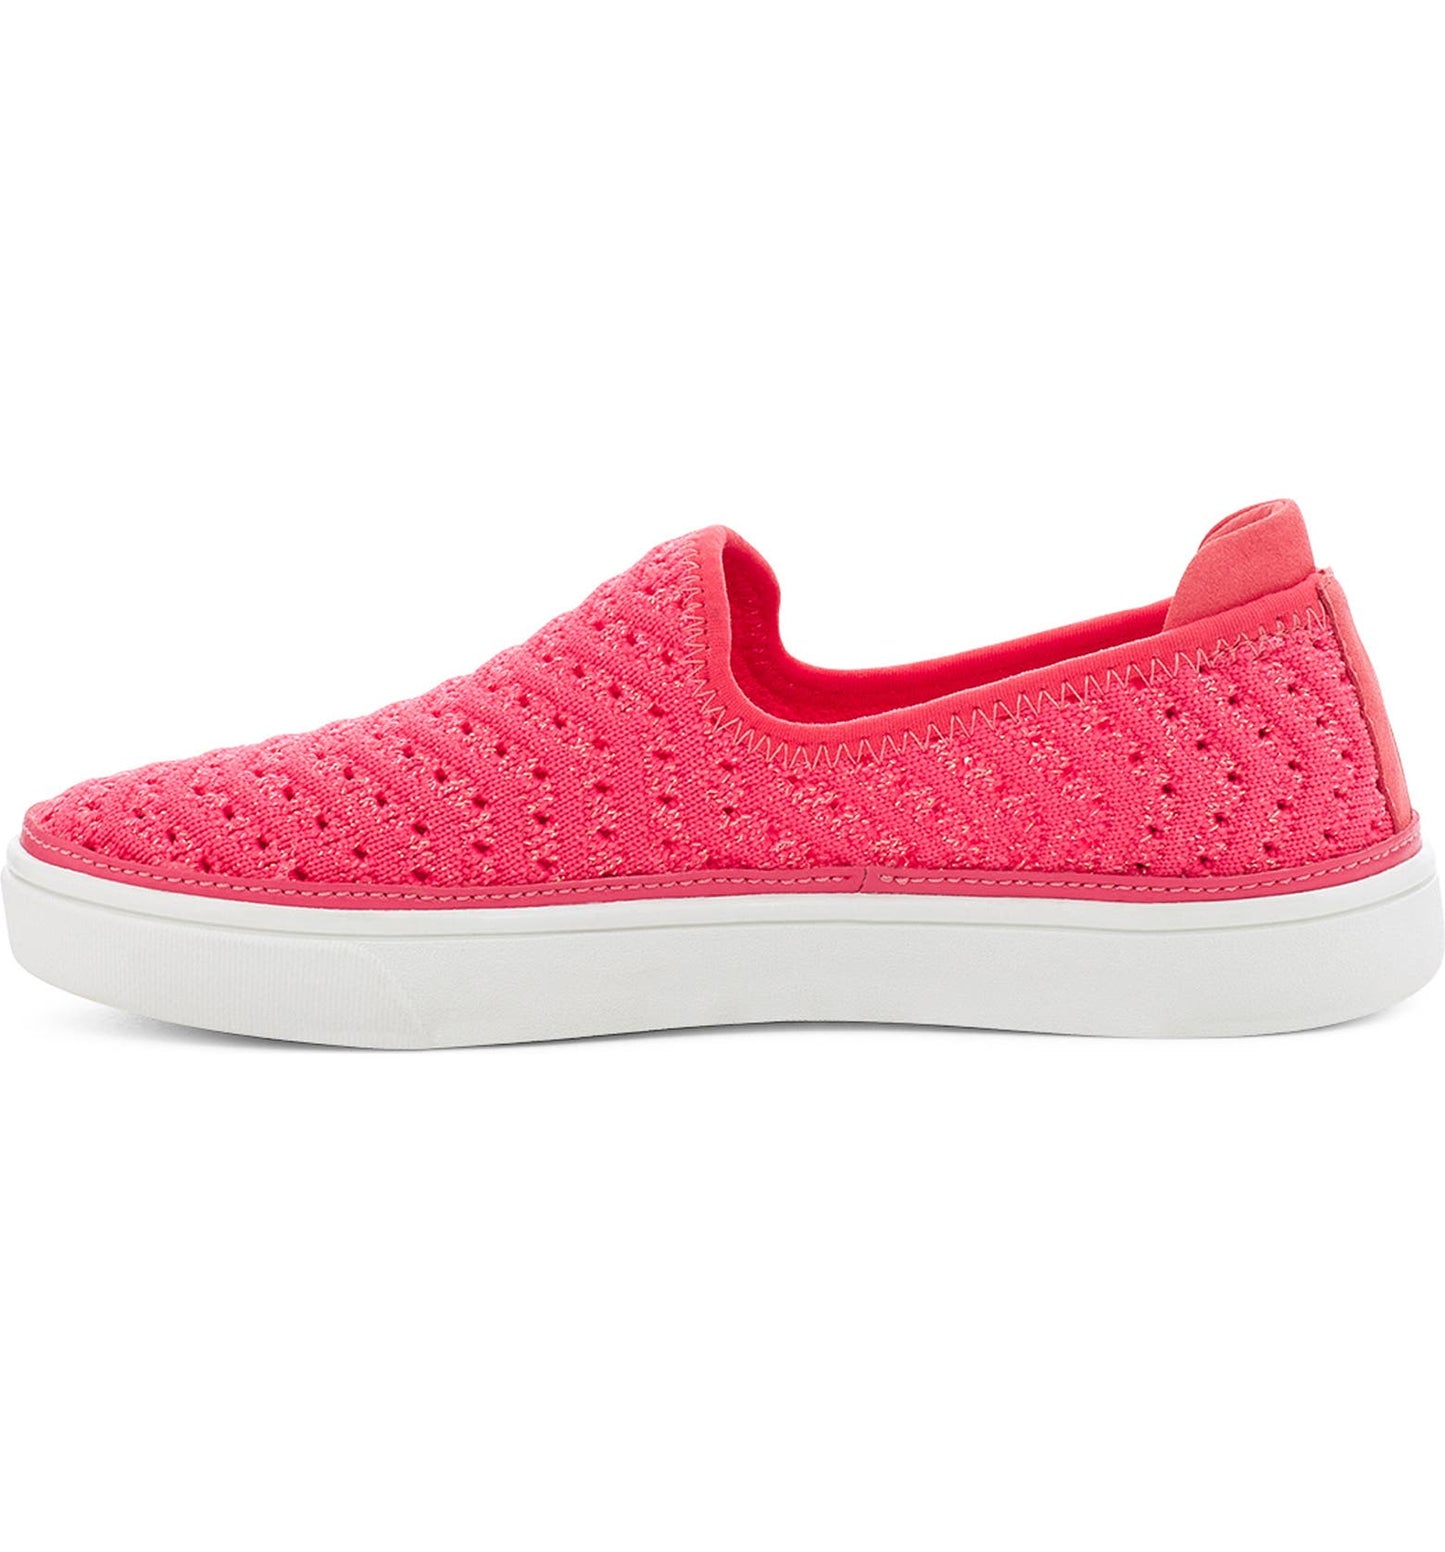 A breathable knit upper flecked with metallic shimmer defines an easy-going slip-on sneaker furnished with a cushioned footbed for play-all-day comfort. An antimicrobial lining made from recycled materials adds an eco-friendly touch while helping to keep little feet fresh.